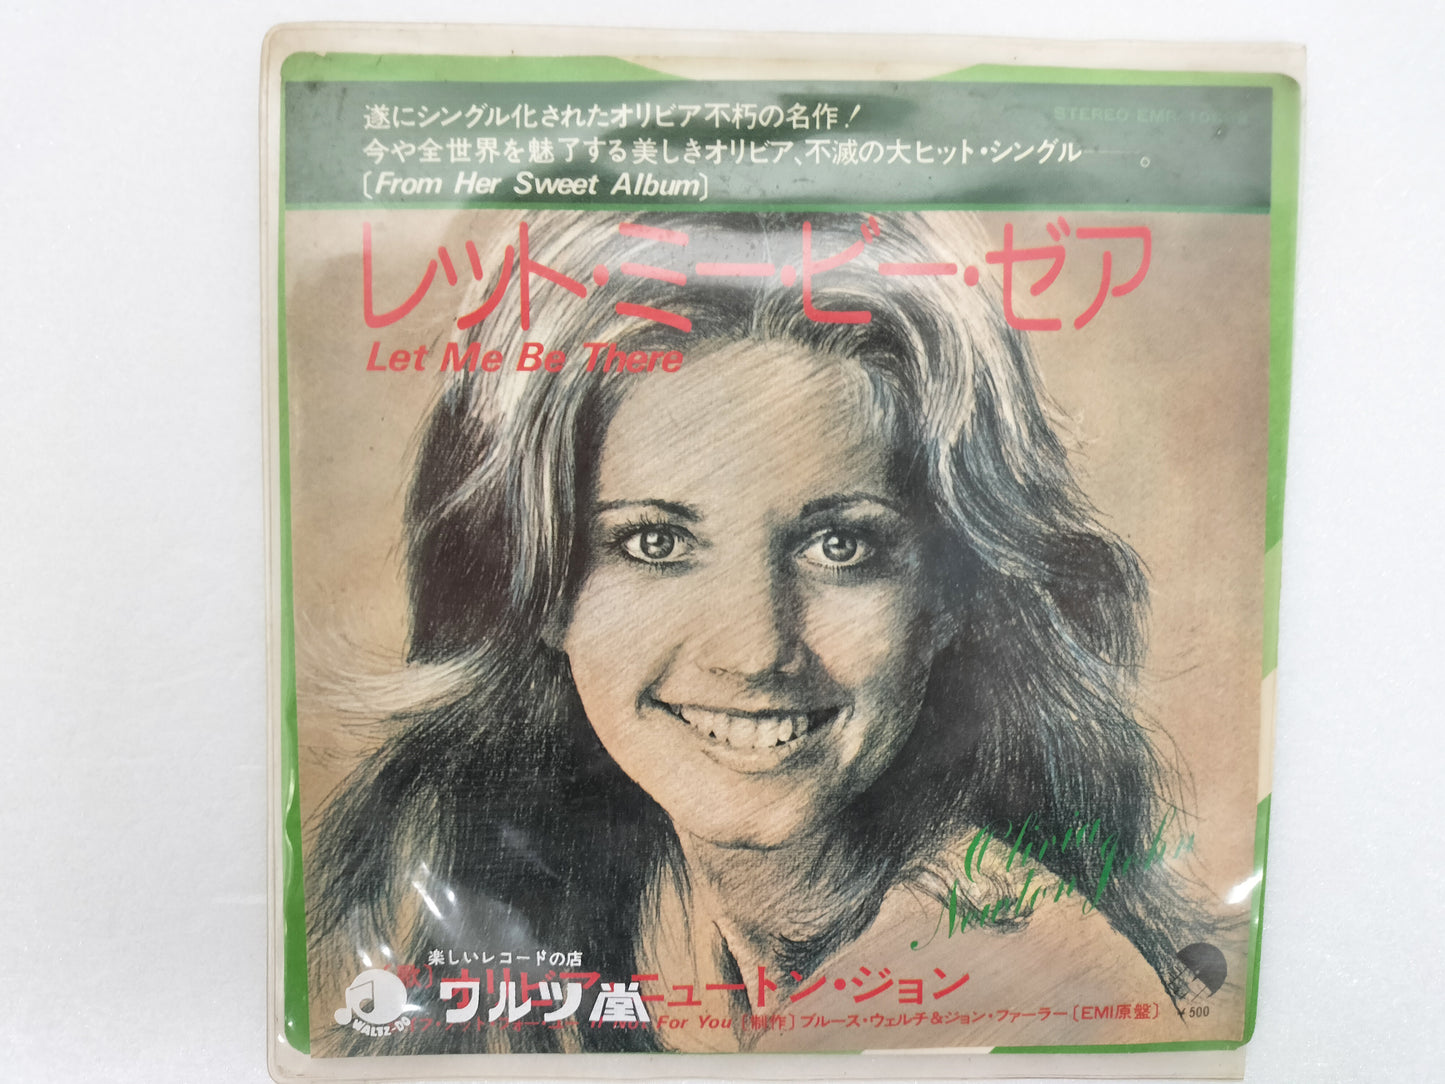 1971 Let Me Be There Olivia Newton John If Not For You Japanese record vintage